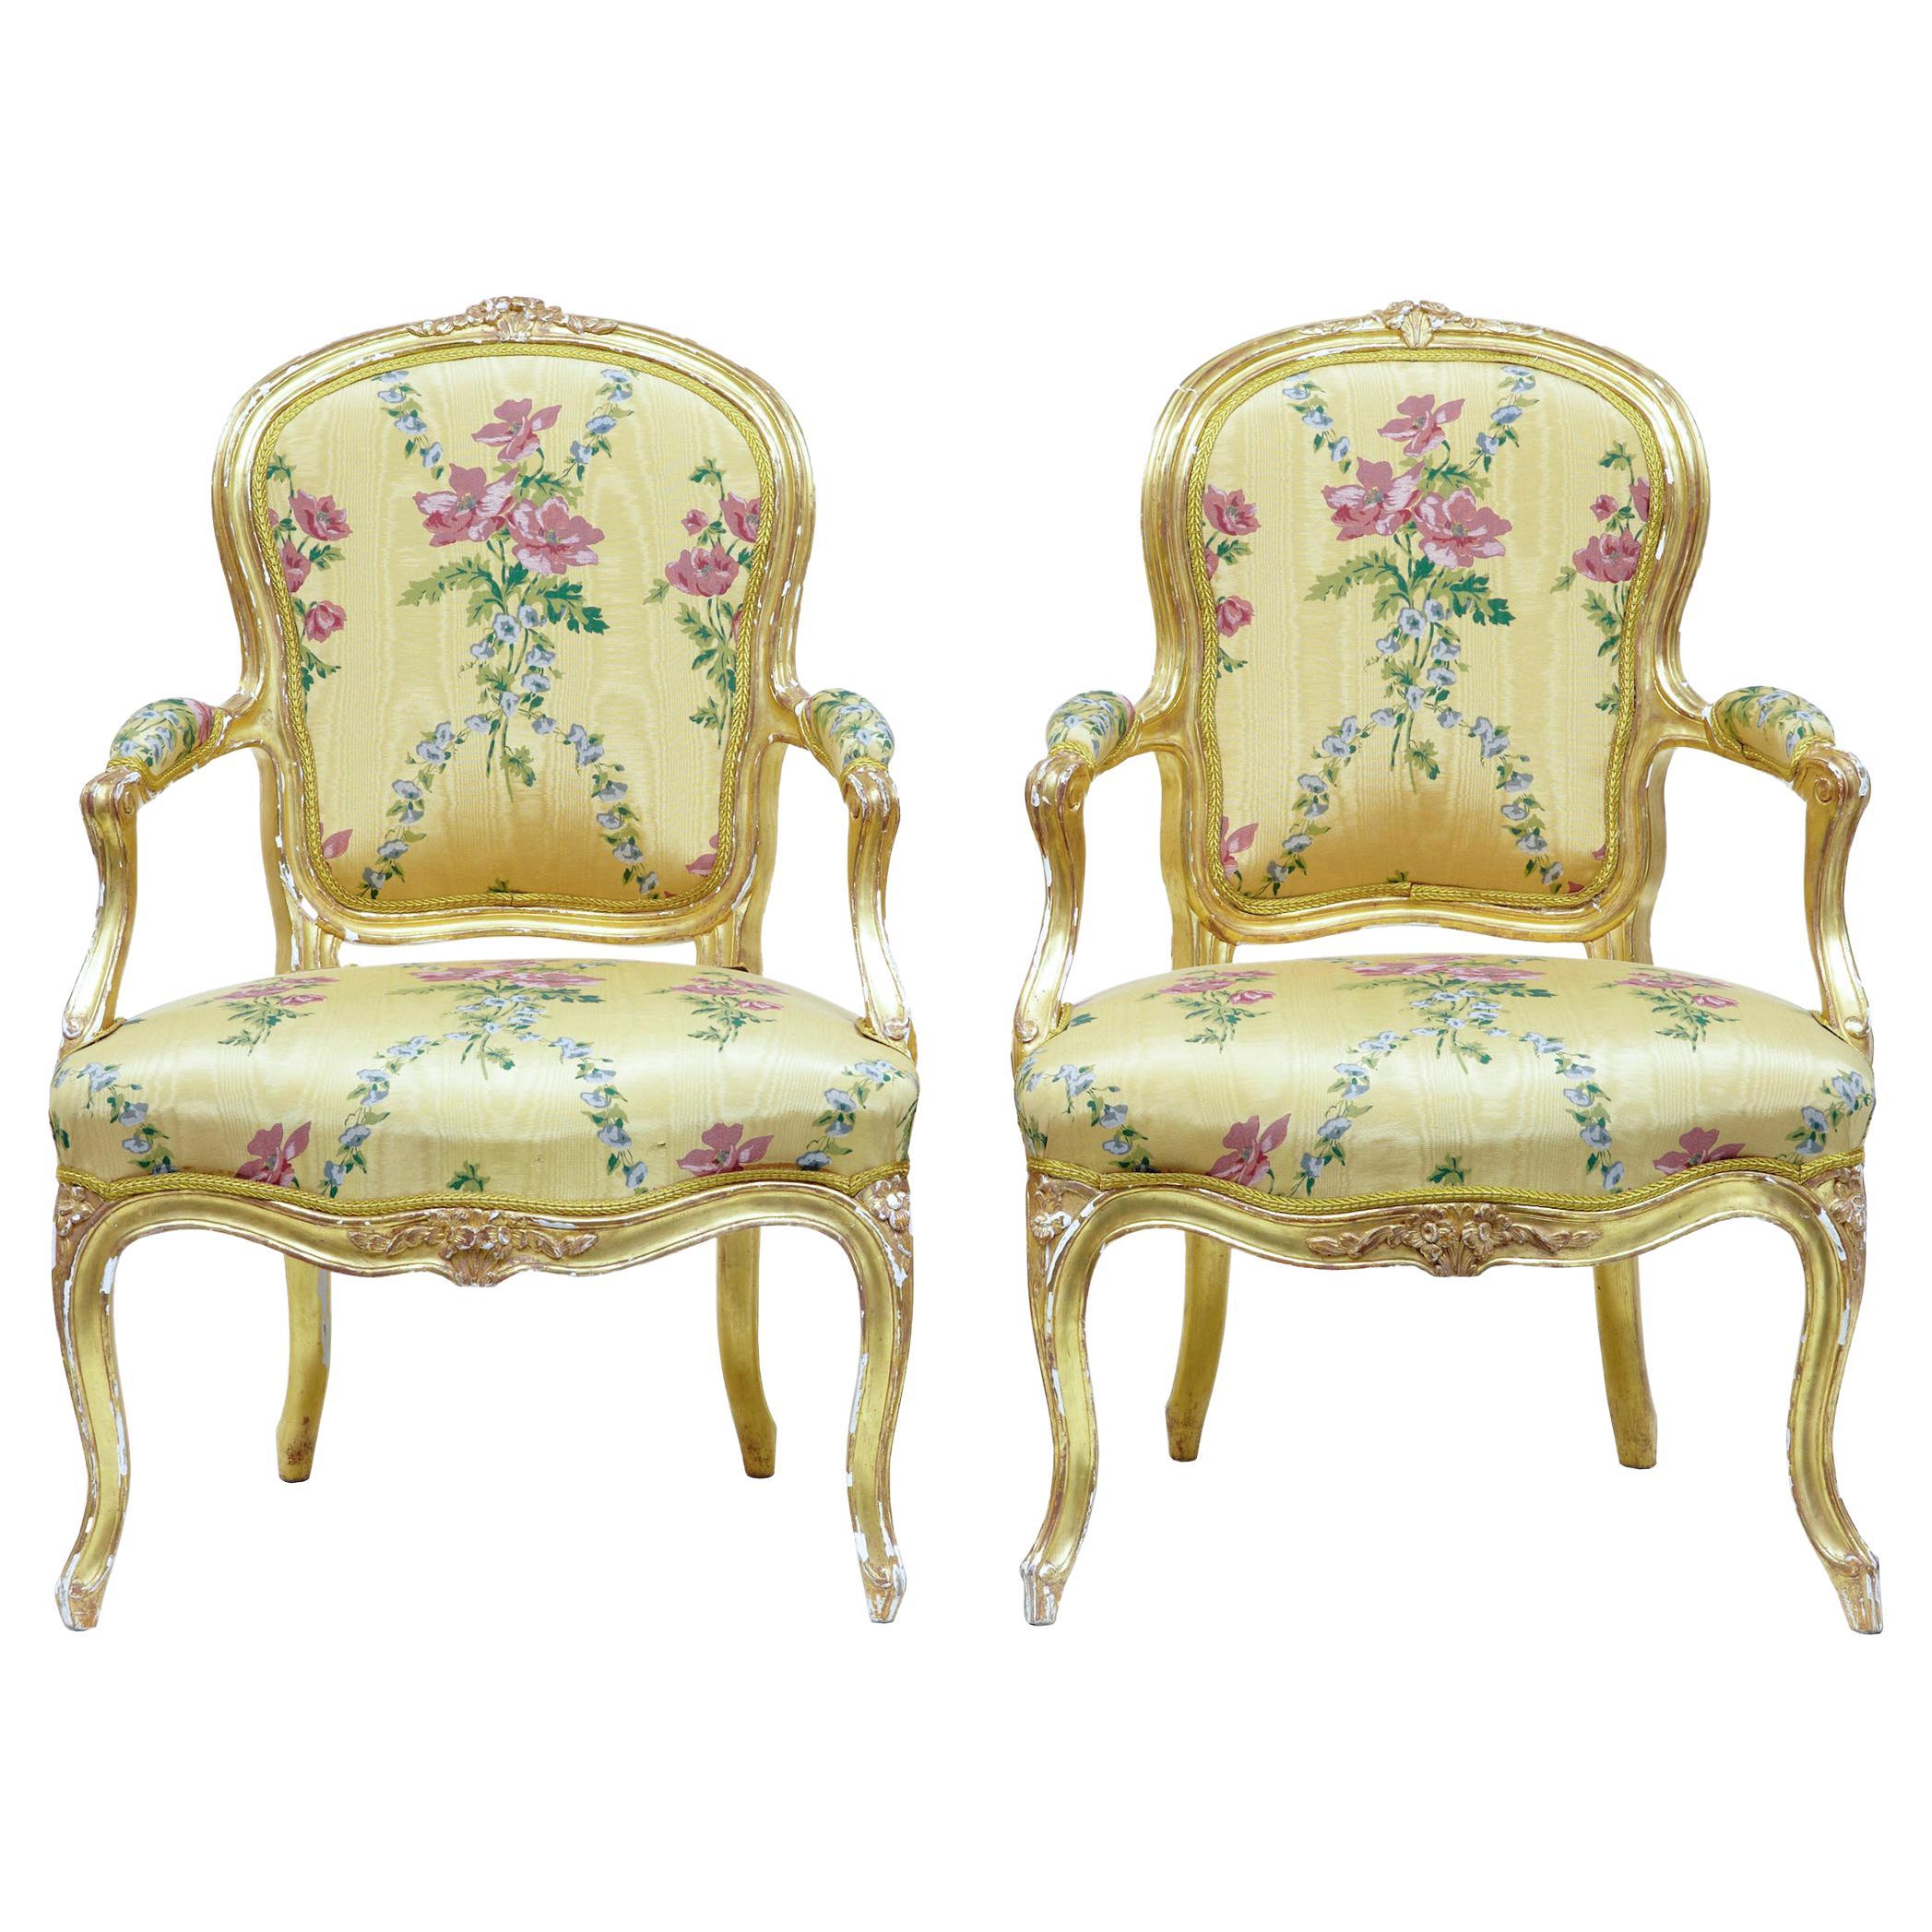 Pair of 18th Century Louis XV Gilt Armchairs by Michard